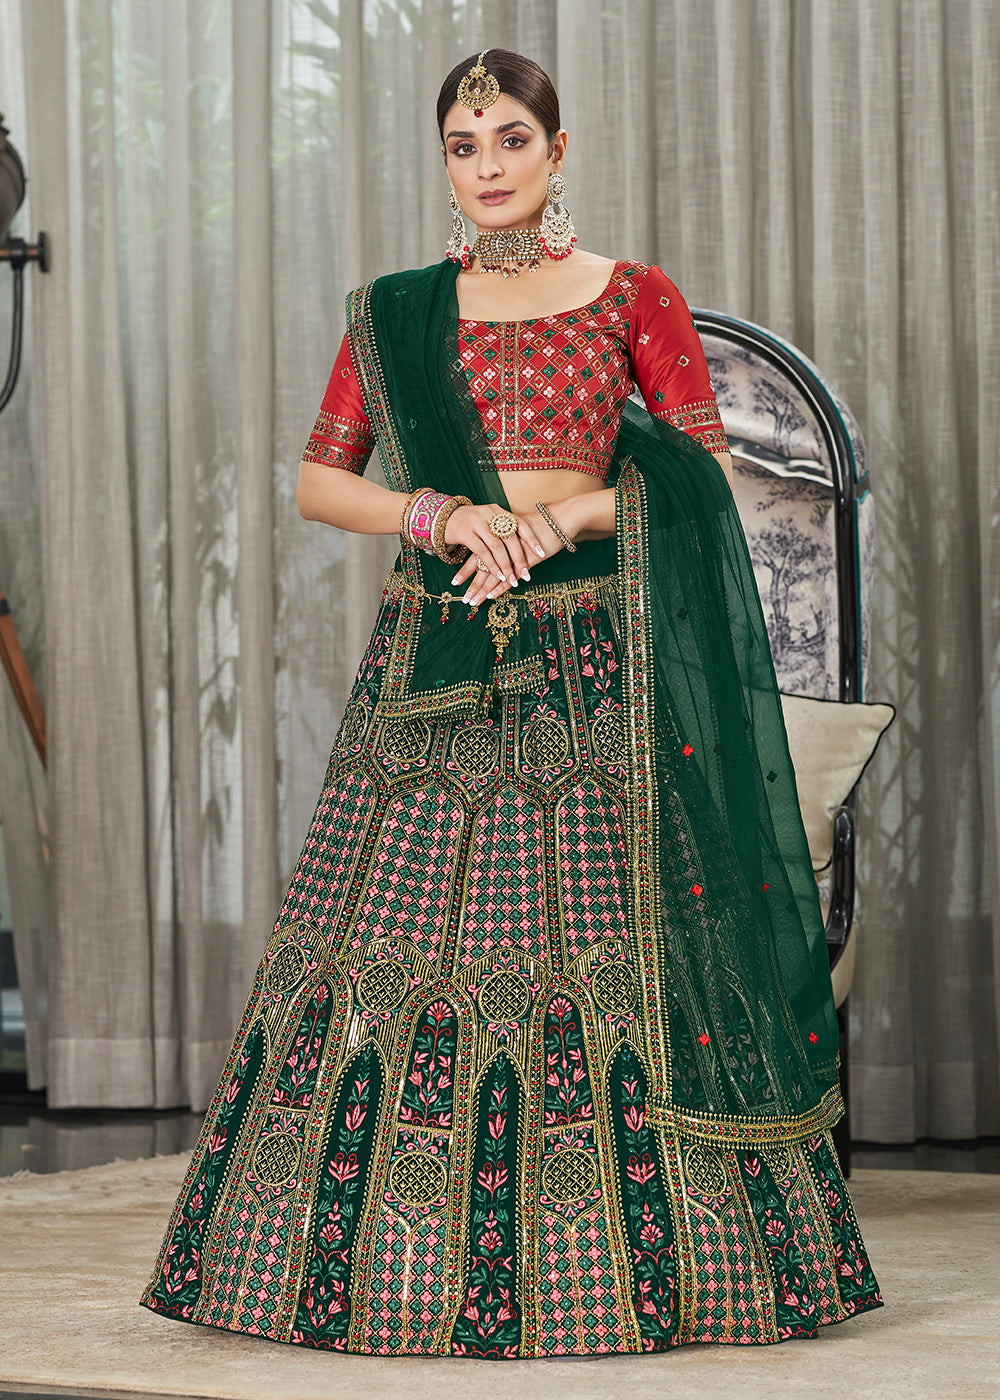 Buy Now Green & Red Multi Sequins & Thread A Line Wedding Lehenga Choli Online in USA, UK, Canada & Worldwide at Empress Clothing.